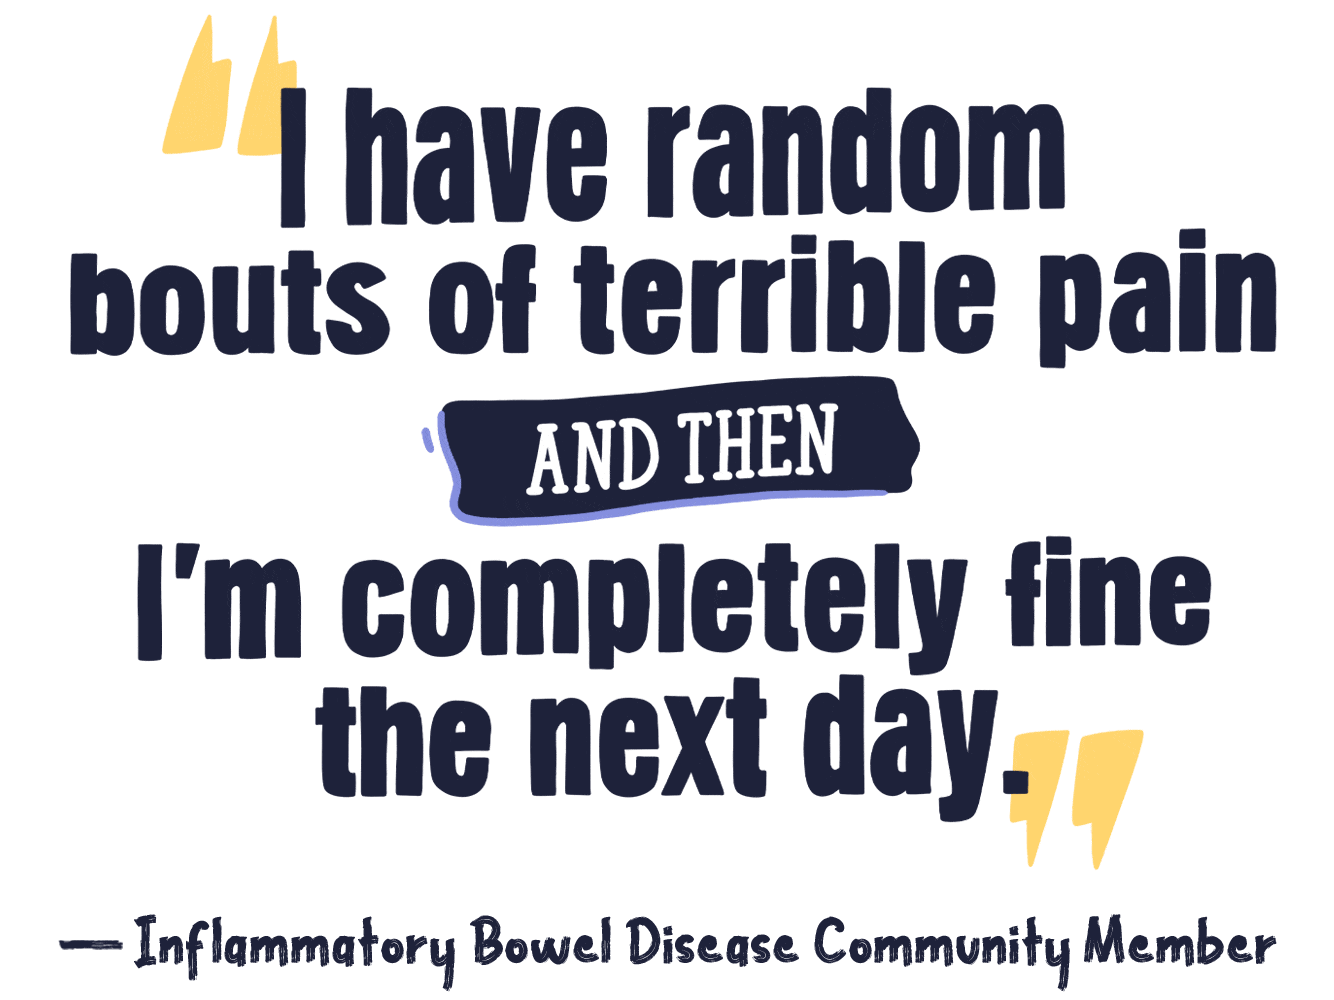 I have random bouts of terrible pain and then I’m completely fine the next day.– Inflammatory Bowel Disease Community Member